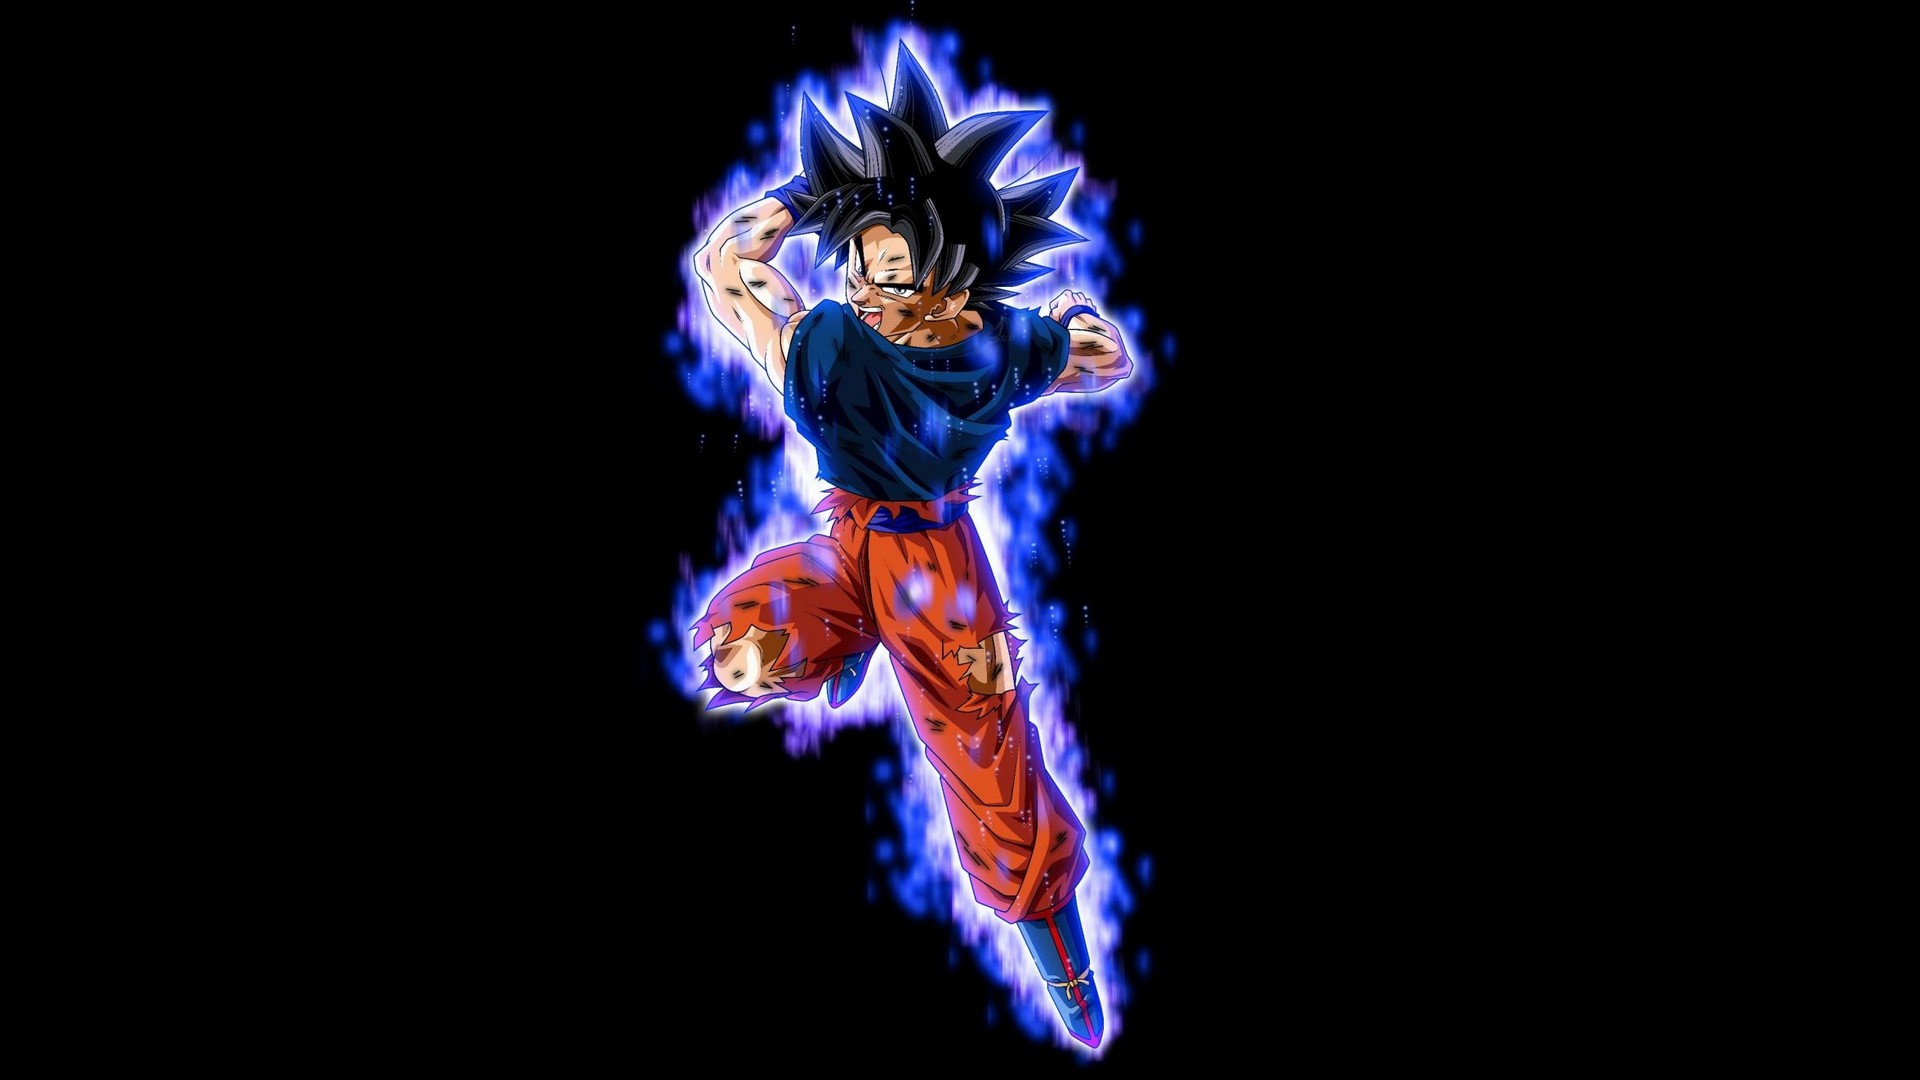 Goku Imagenes Desktop Wallpaper with resolution 1920X1080 pixel. You can use this wallpaper as background for your desktop Computer Screensavers, Android or iPhone smartphones